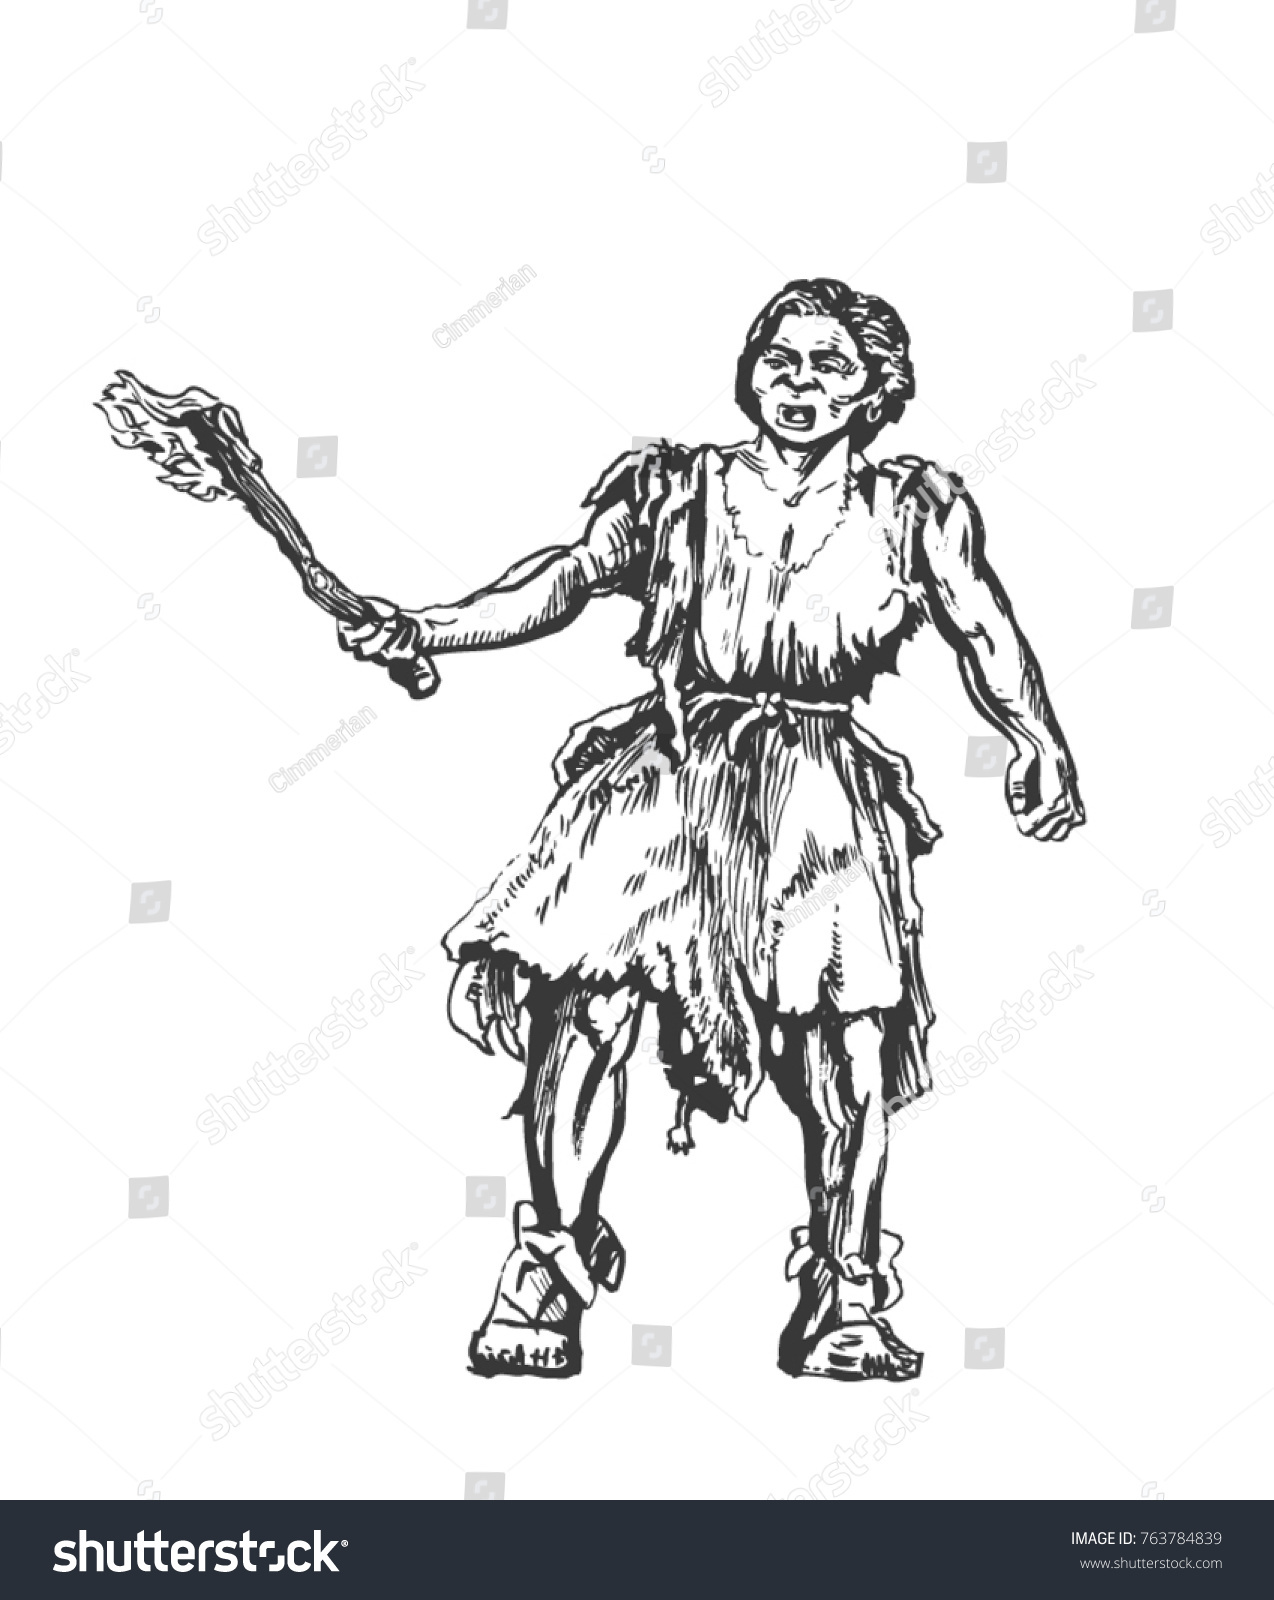 SVG of Cro-Magnon woman with a torch. Graphic sketch svg